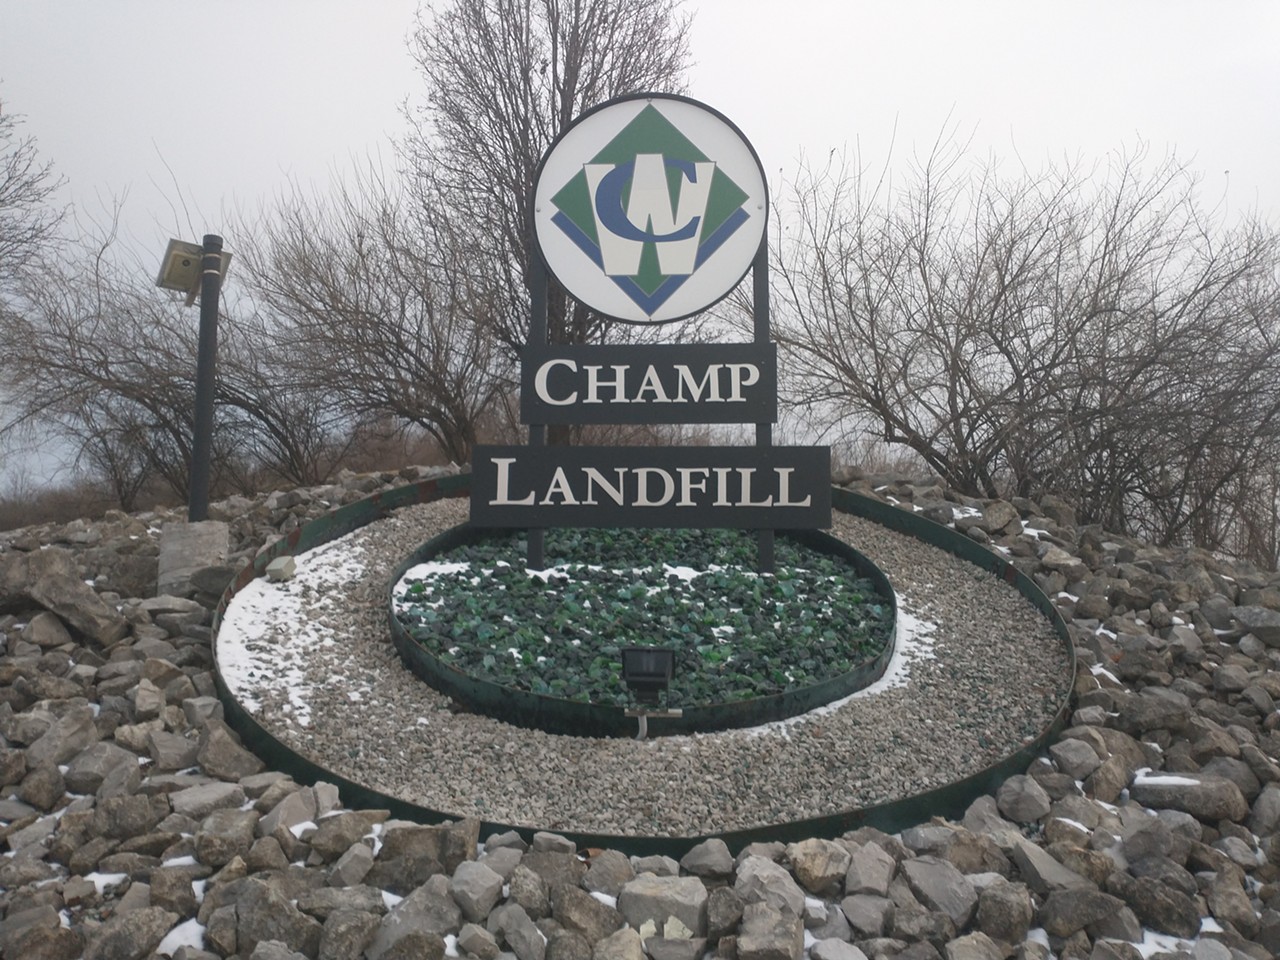 Champ
Champ only has 12 people, but it was founded on grand ambitions by a former shot put champion who envisioned building a sports stadium (thus its name). Unfortunately, the stadium never materialized, and now its main claim to fame is a giant landfill. Yes, the town is a literal dump. But it’s still better than Chesterfield.